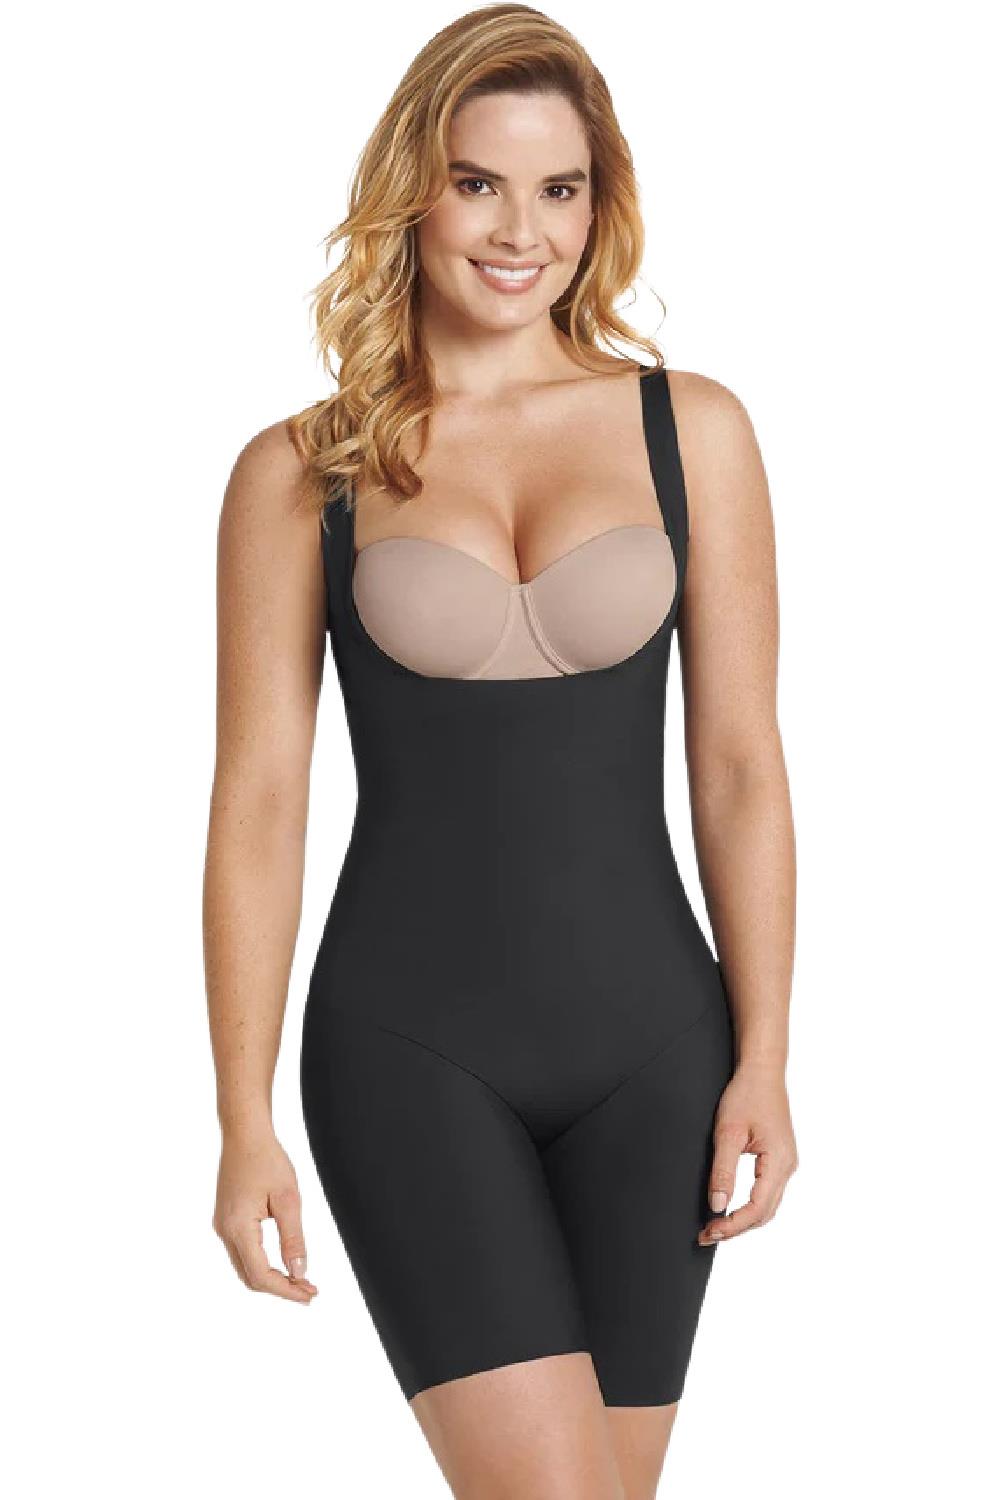 Undetectable Step-In Mid-Thigh Body Shaper 018483 – My Top Drawer